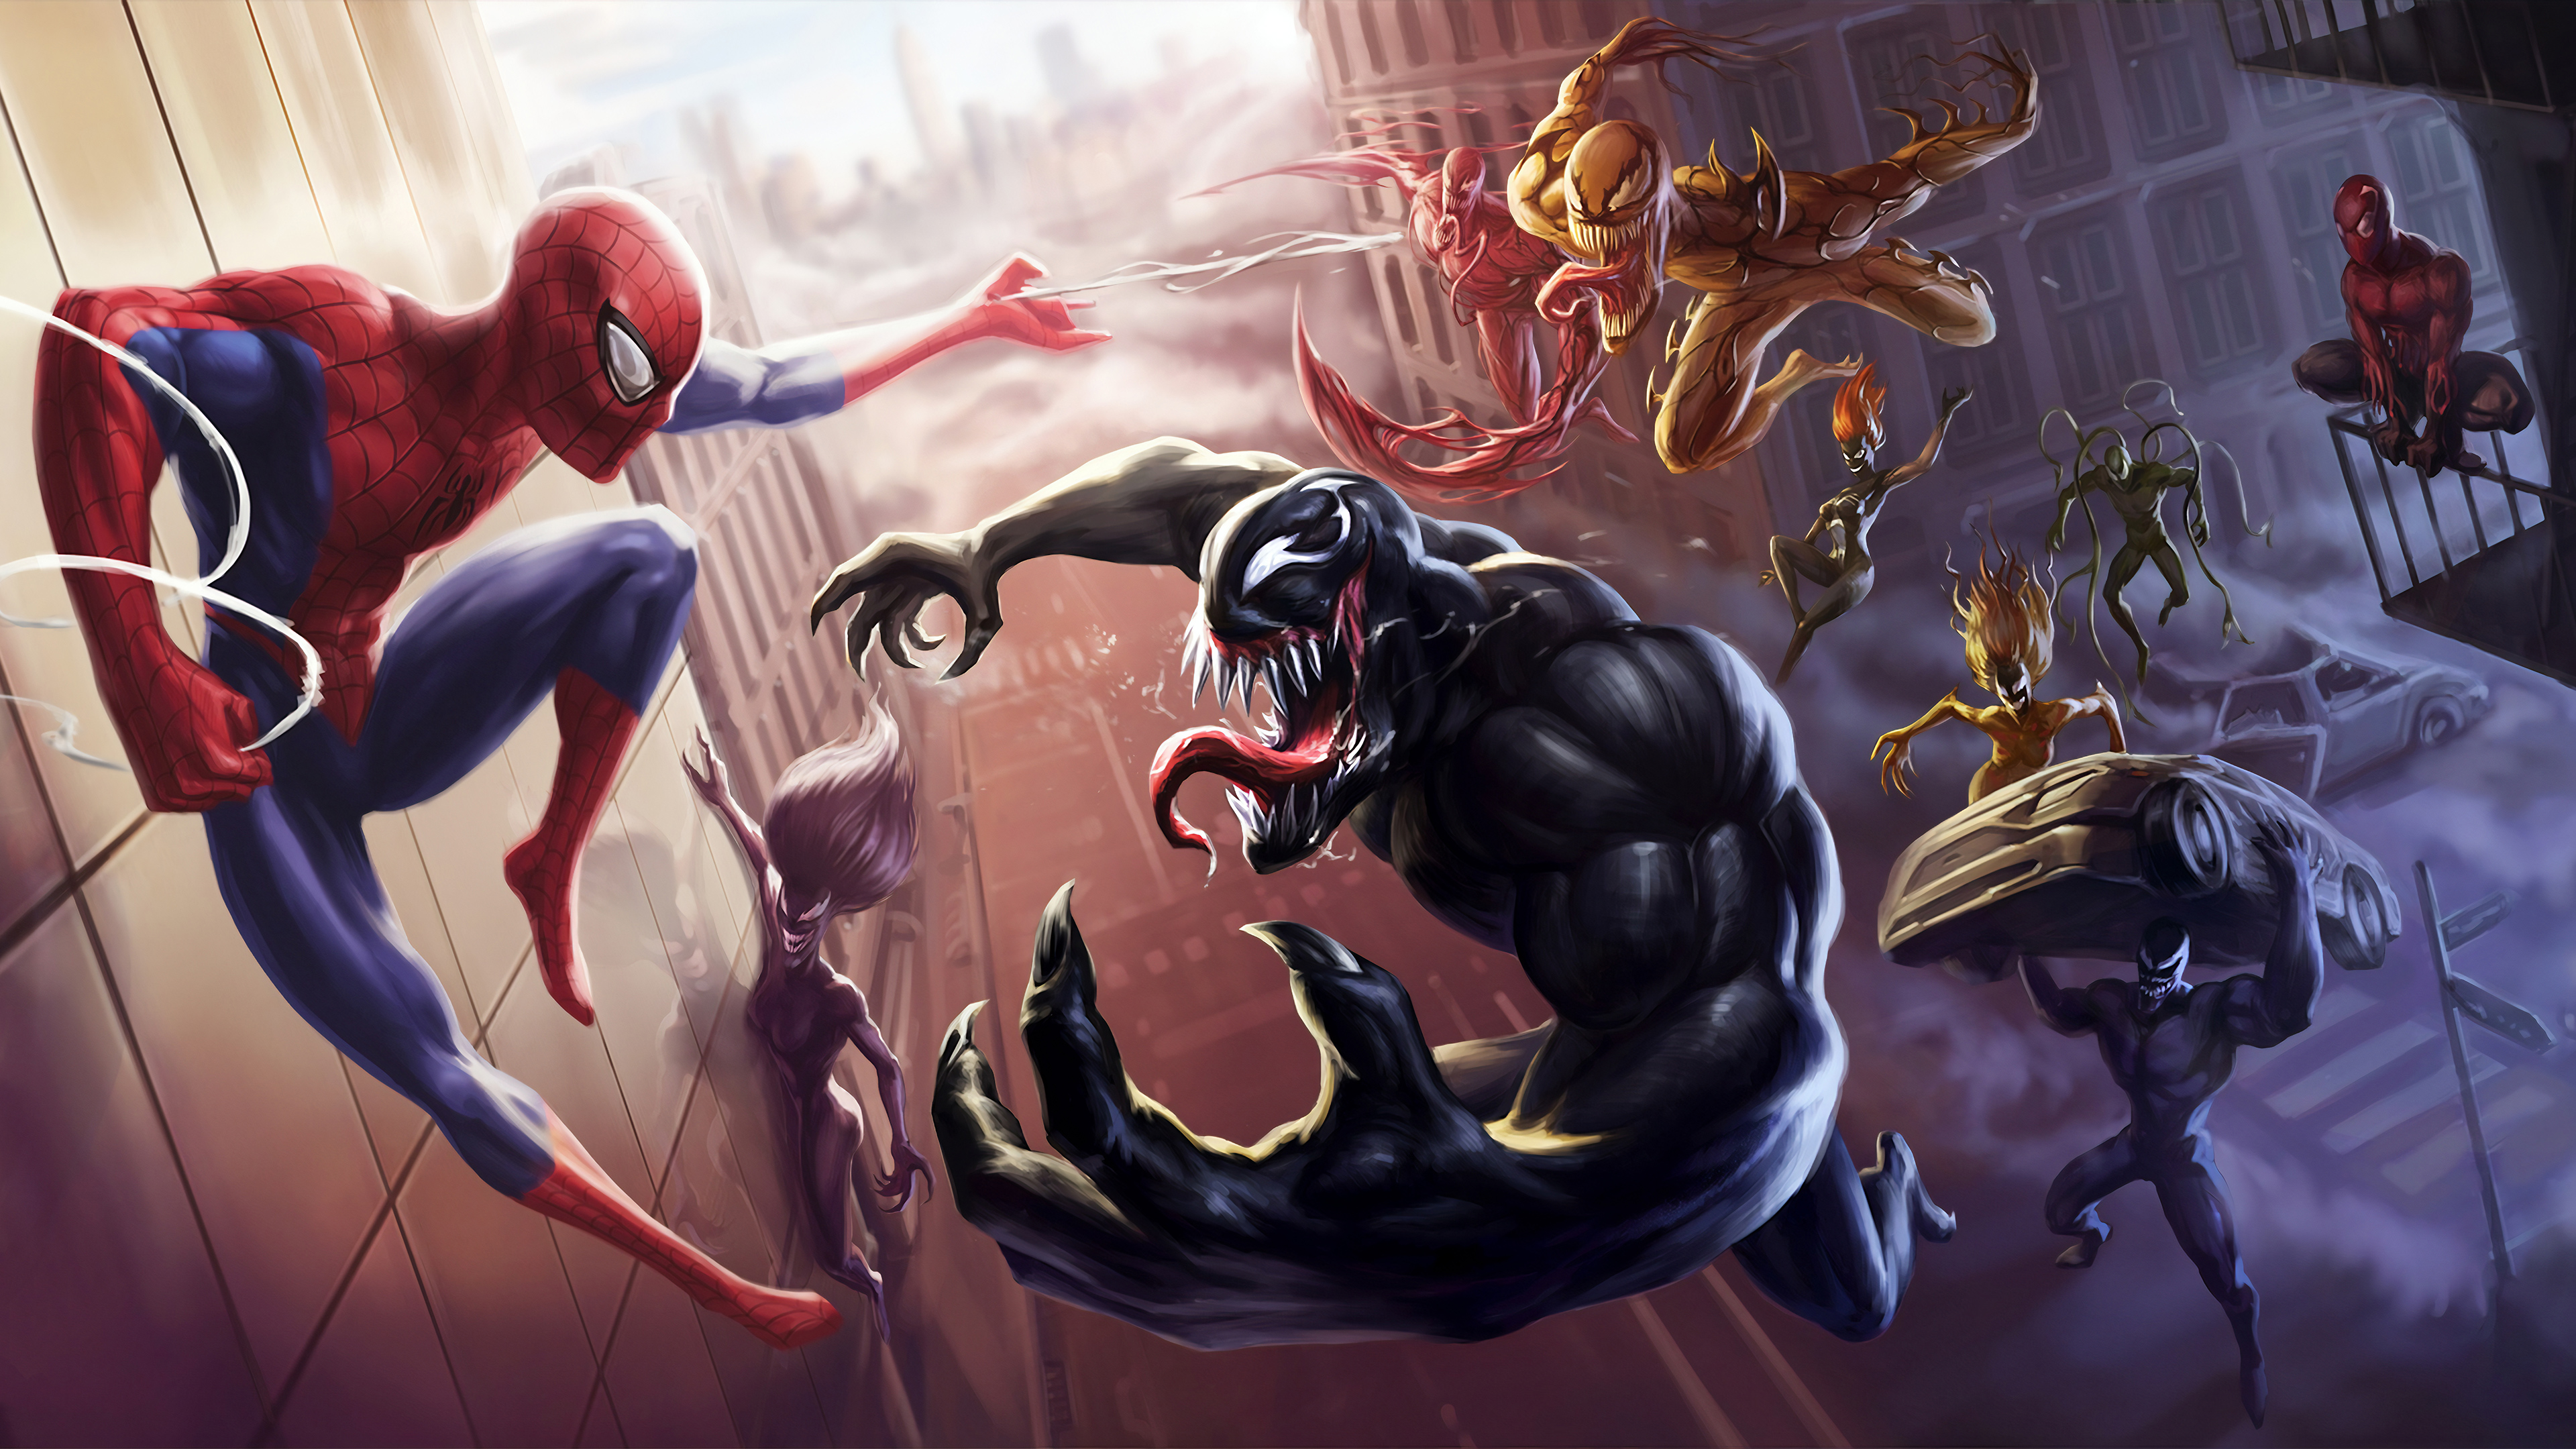 The Spiderman X Venom 4k HD Superheroes 4k Wallpapers Images Backgrounds  Photos and Pictures